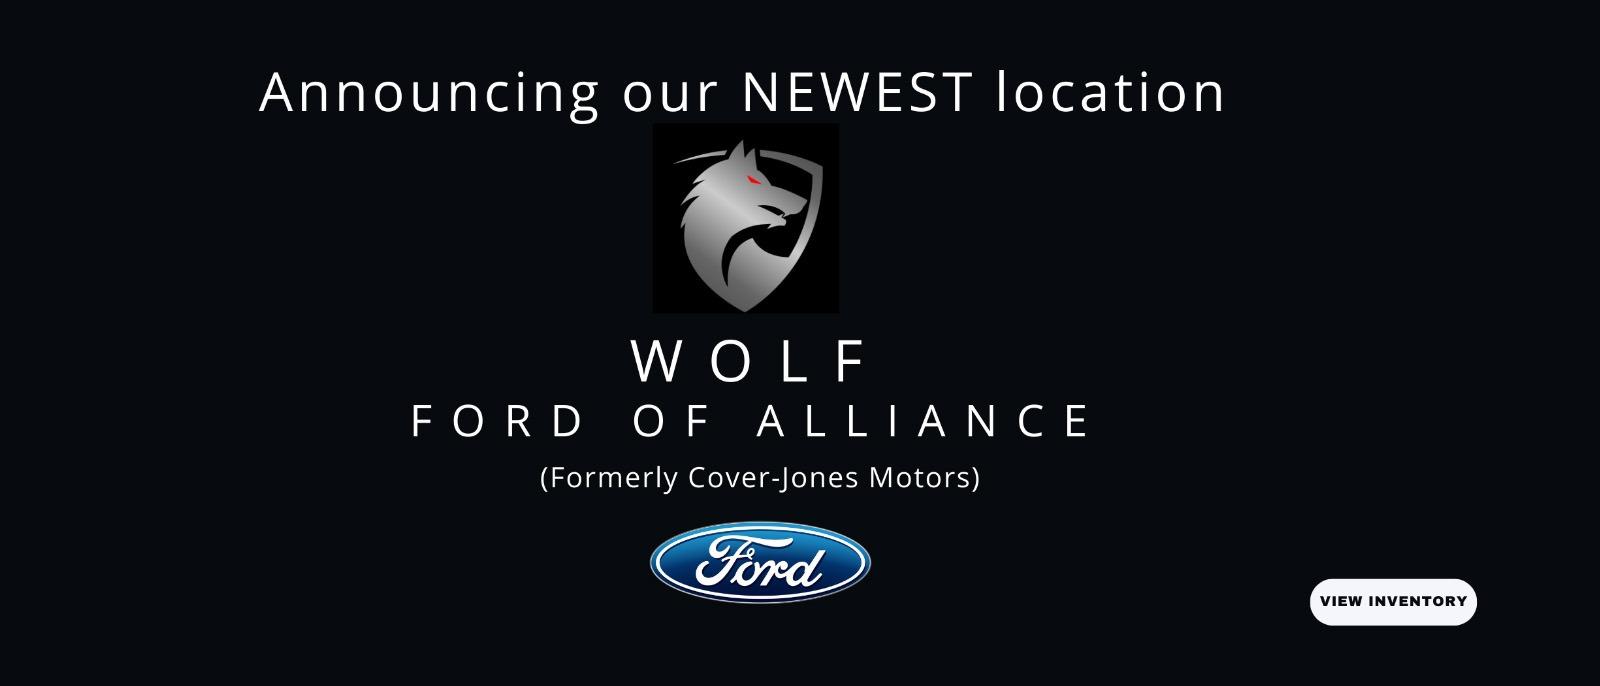 Welcome to Wolf Ford of Alliance